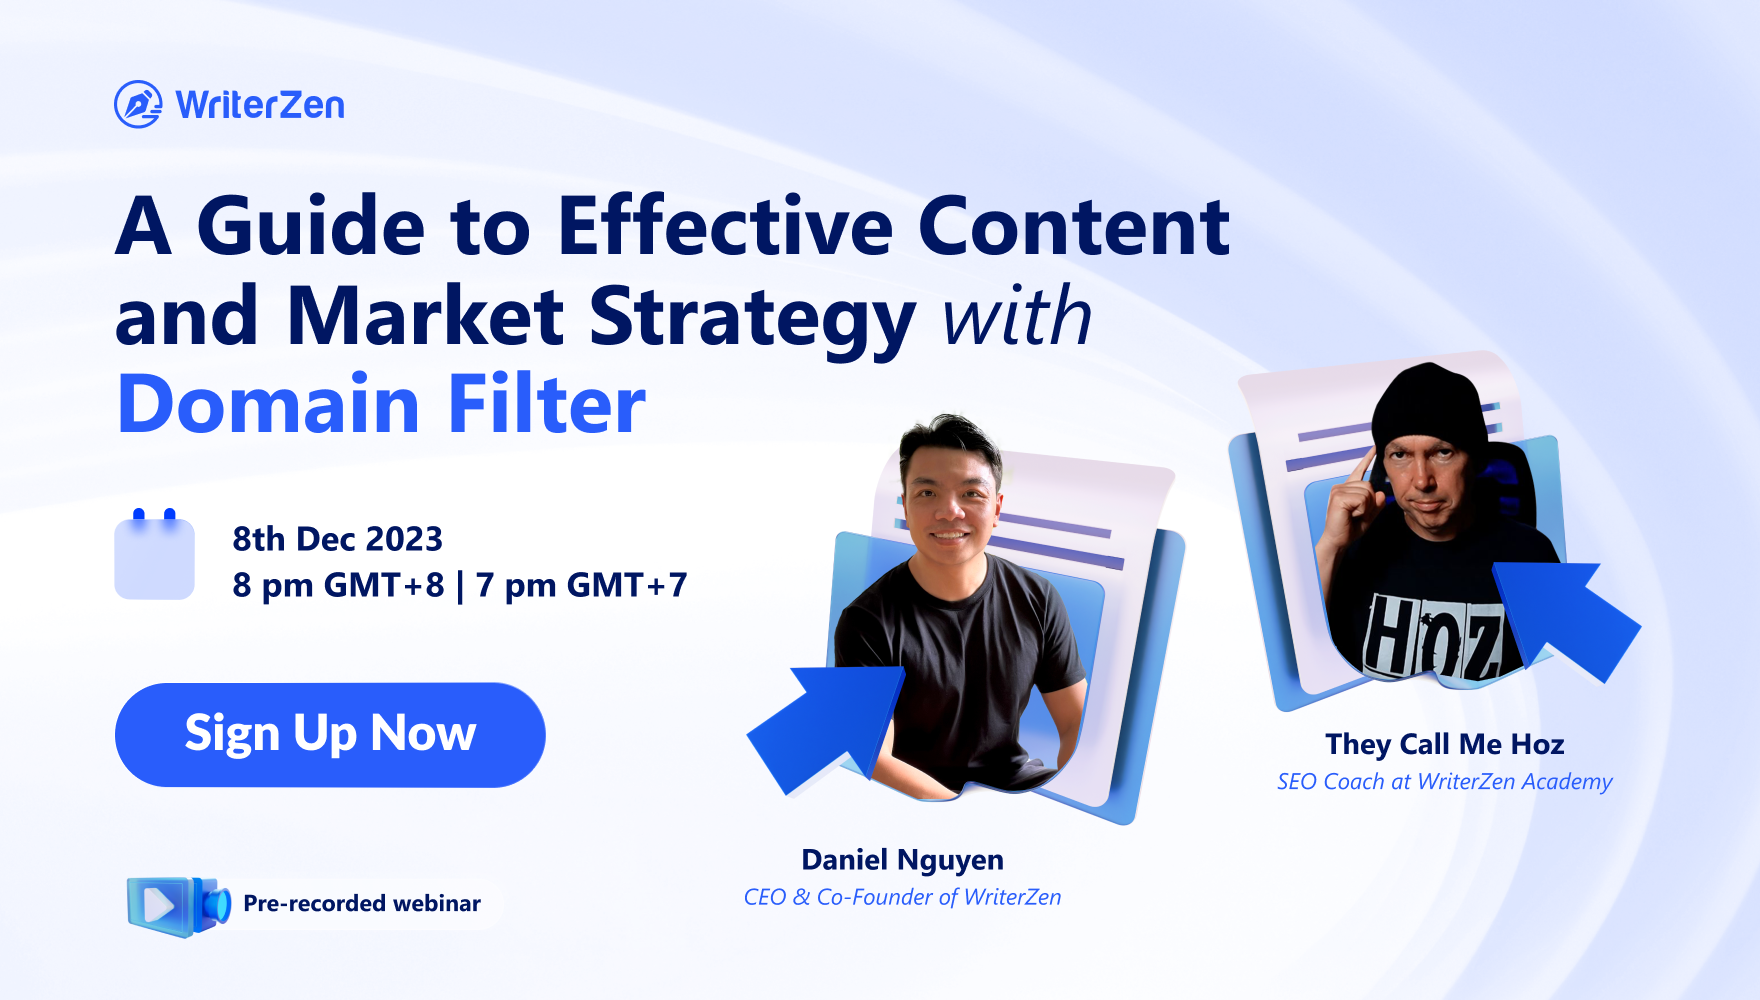 A Guide to Effective Content and Market Strategy with Domain Filter